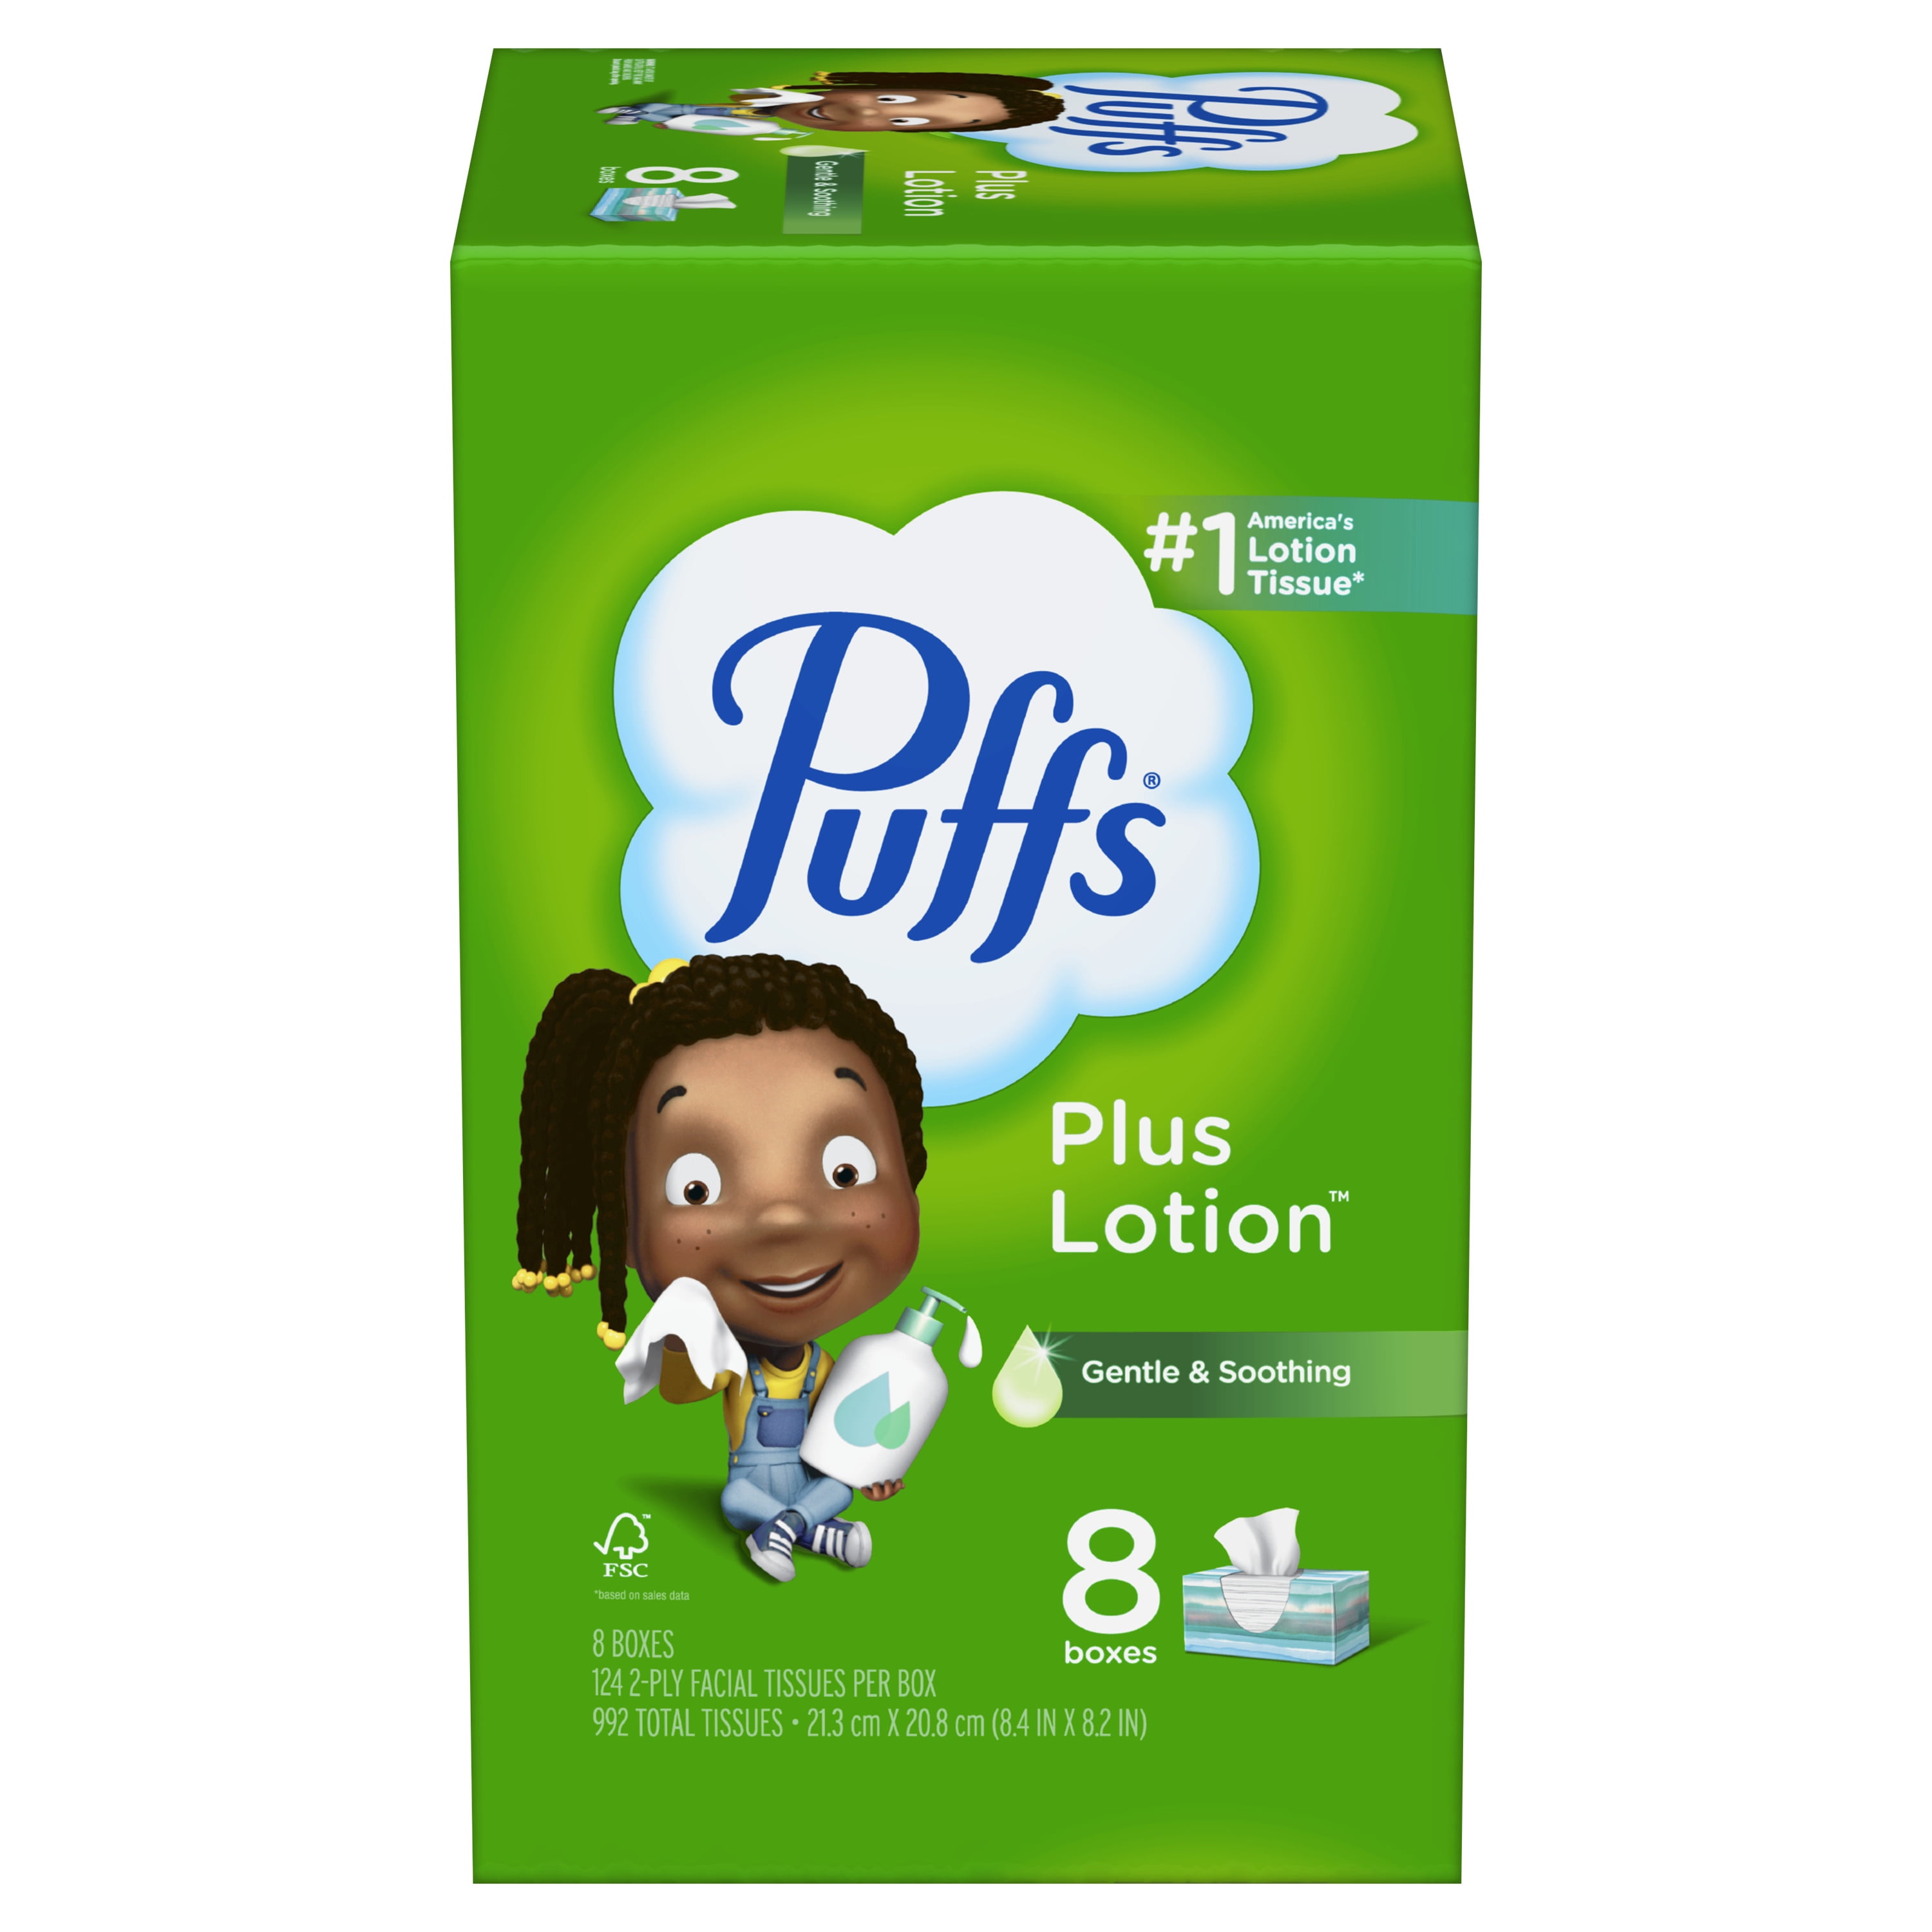 Puffs Plus Lotion Facial Tissue (56-Count) - Power Townsend Company